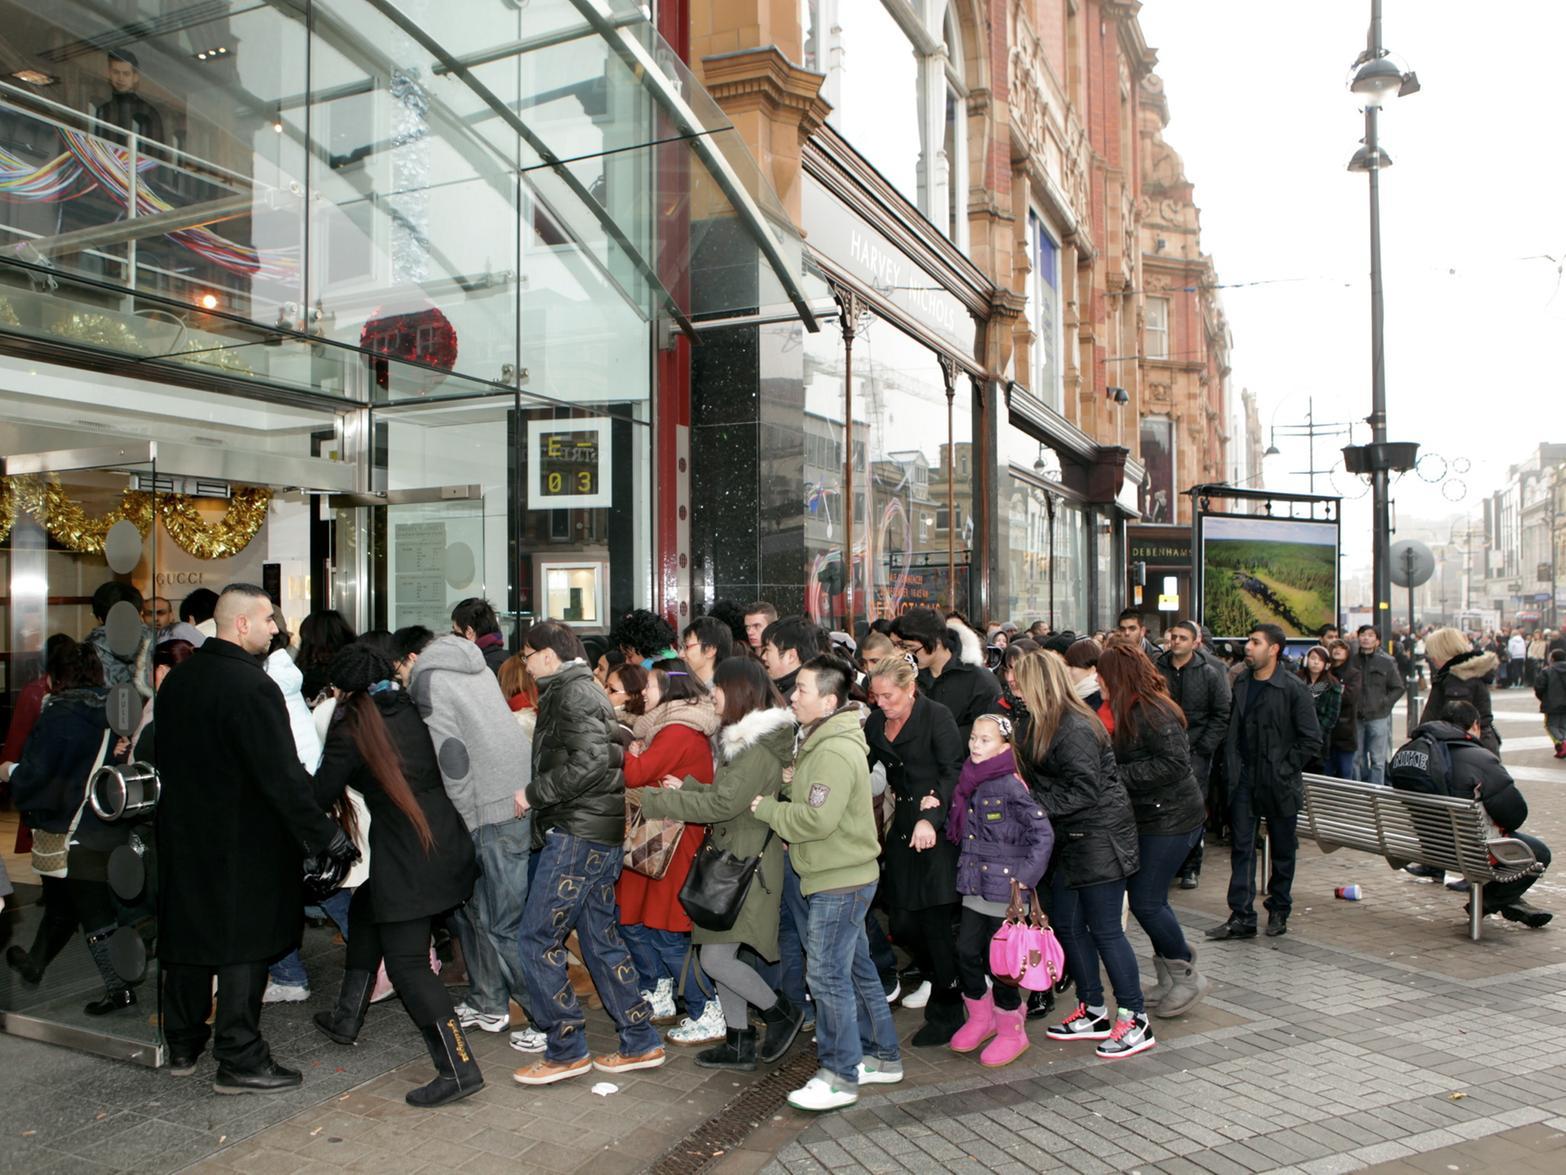 Hundreds of sales hungry shoppers rush in to Harvey Nichols as the doors open for its Boxing Day sale